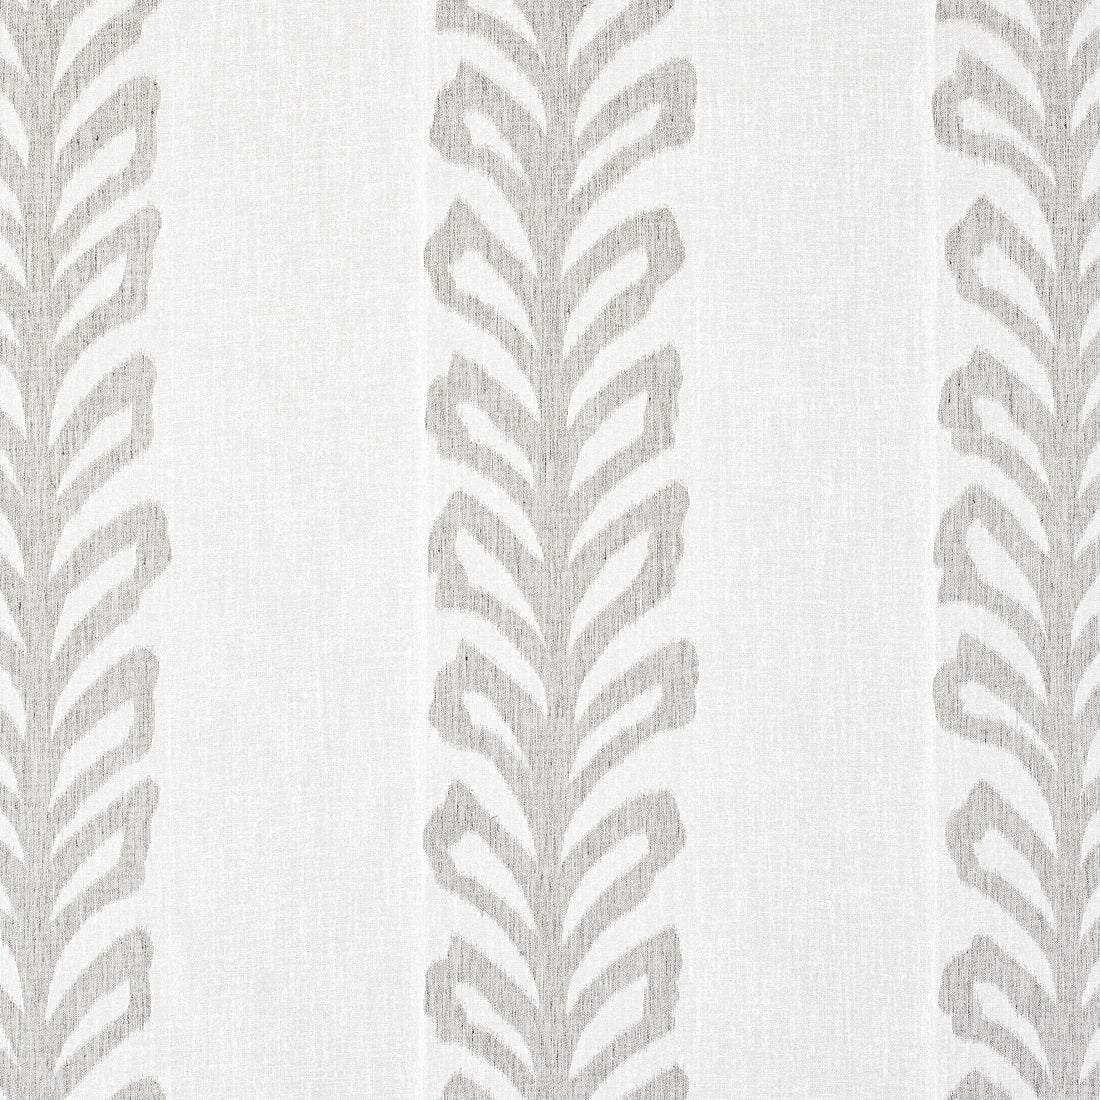 Lenox Sheer fabric in smoke color - pattern number FWW7146 - by Thibaut in the Atmosphere collection